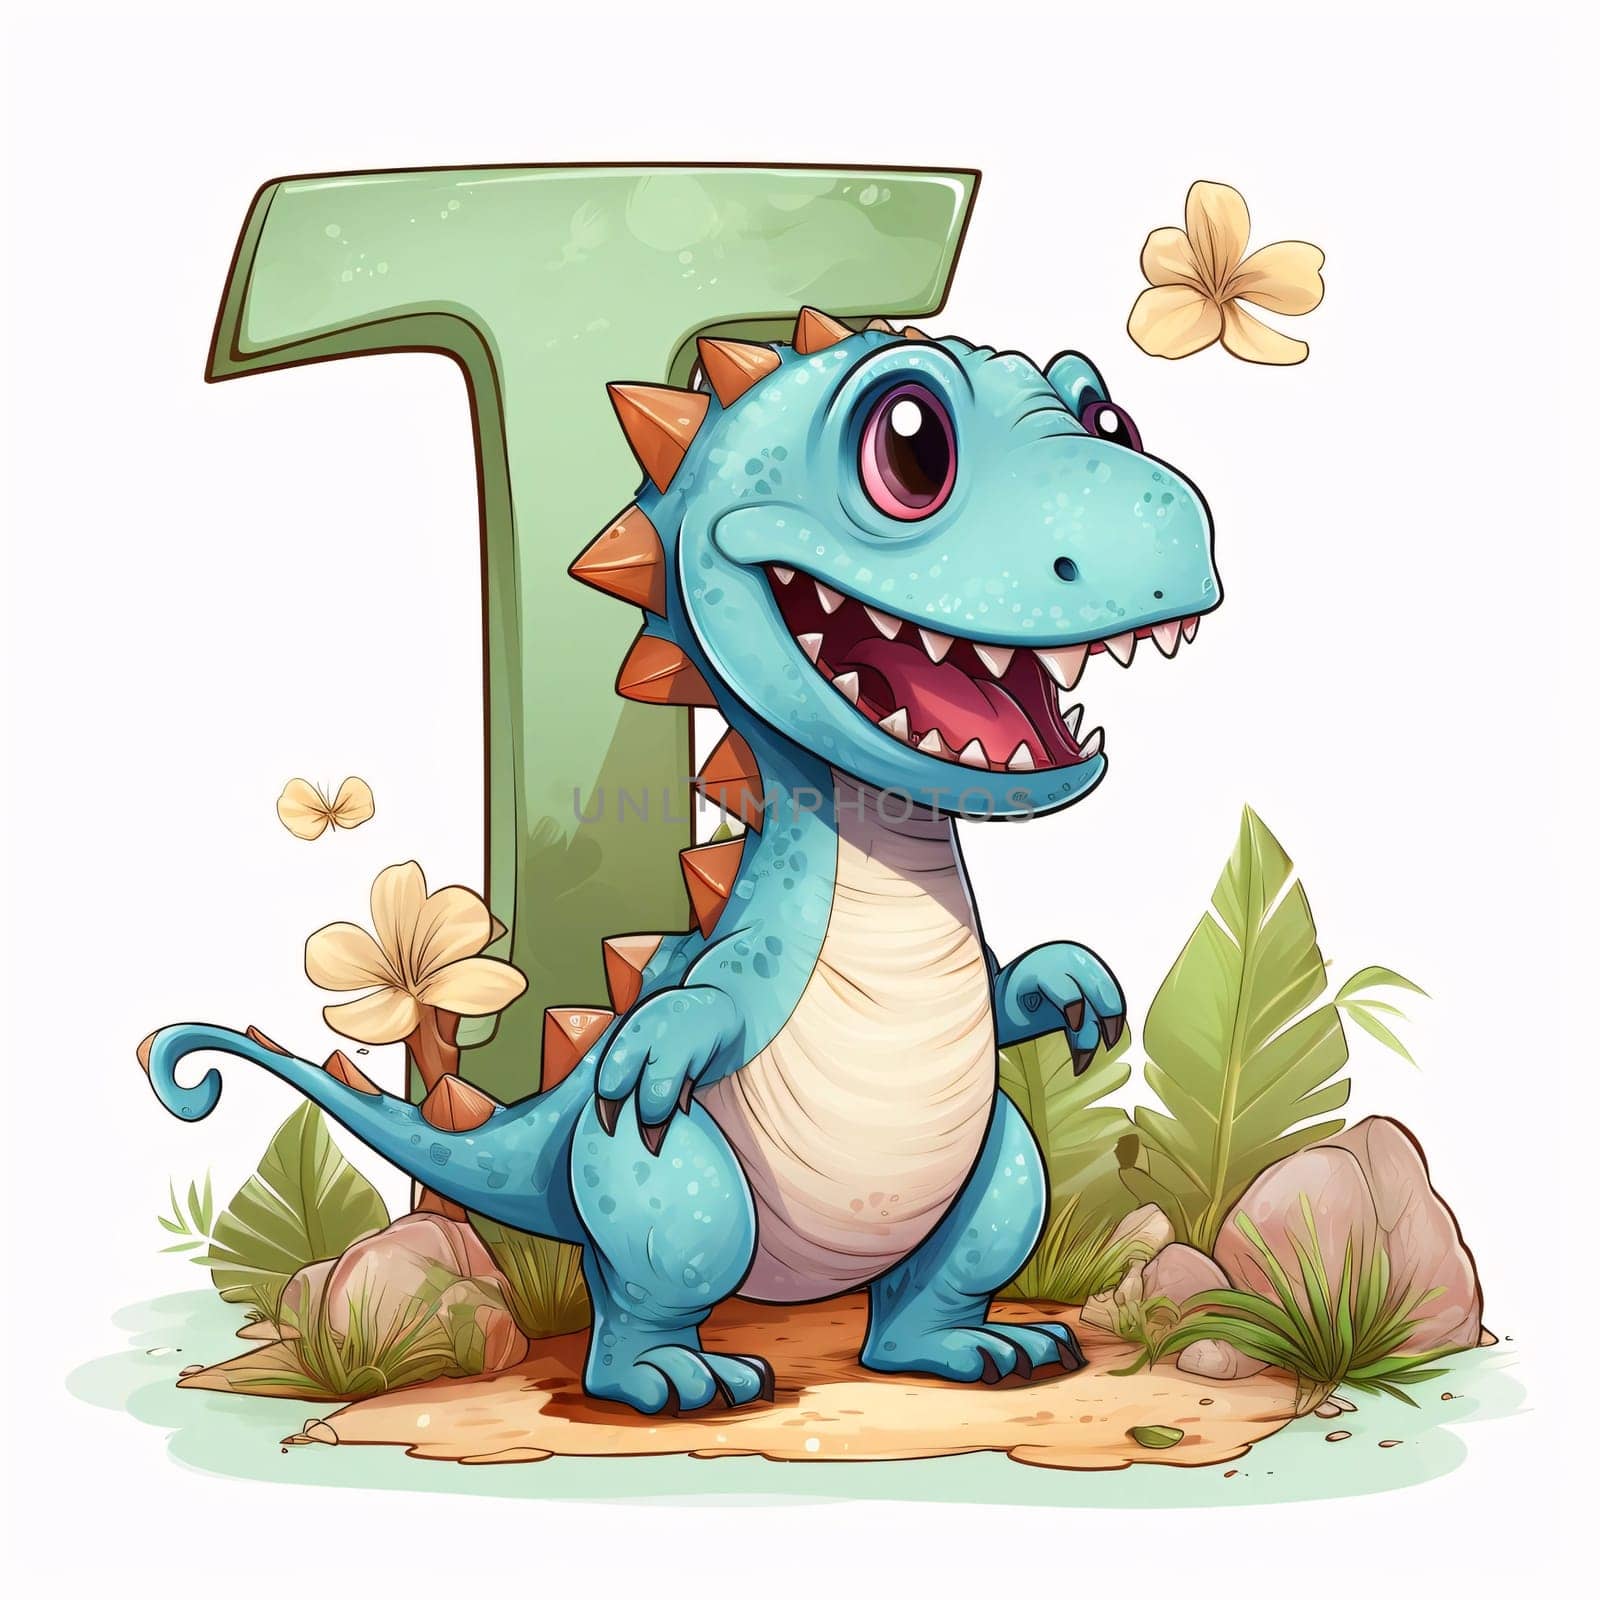 Graphic alphabet letters: Font design for letter T with cute dinosaur on white background illustration.